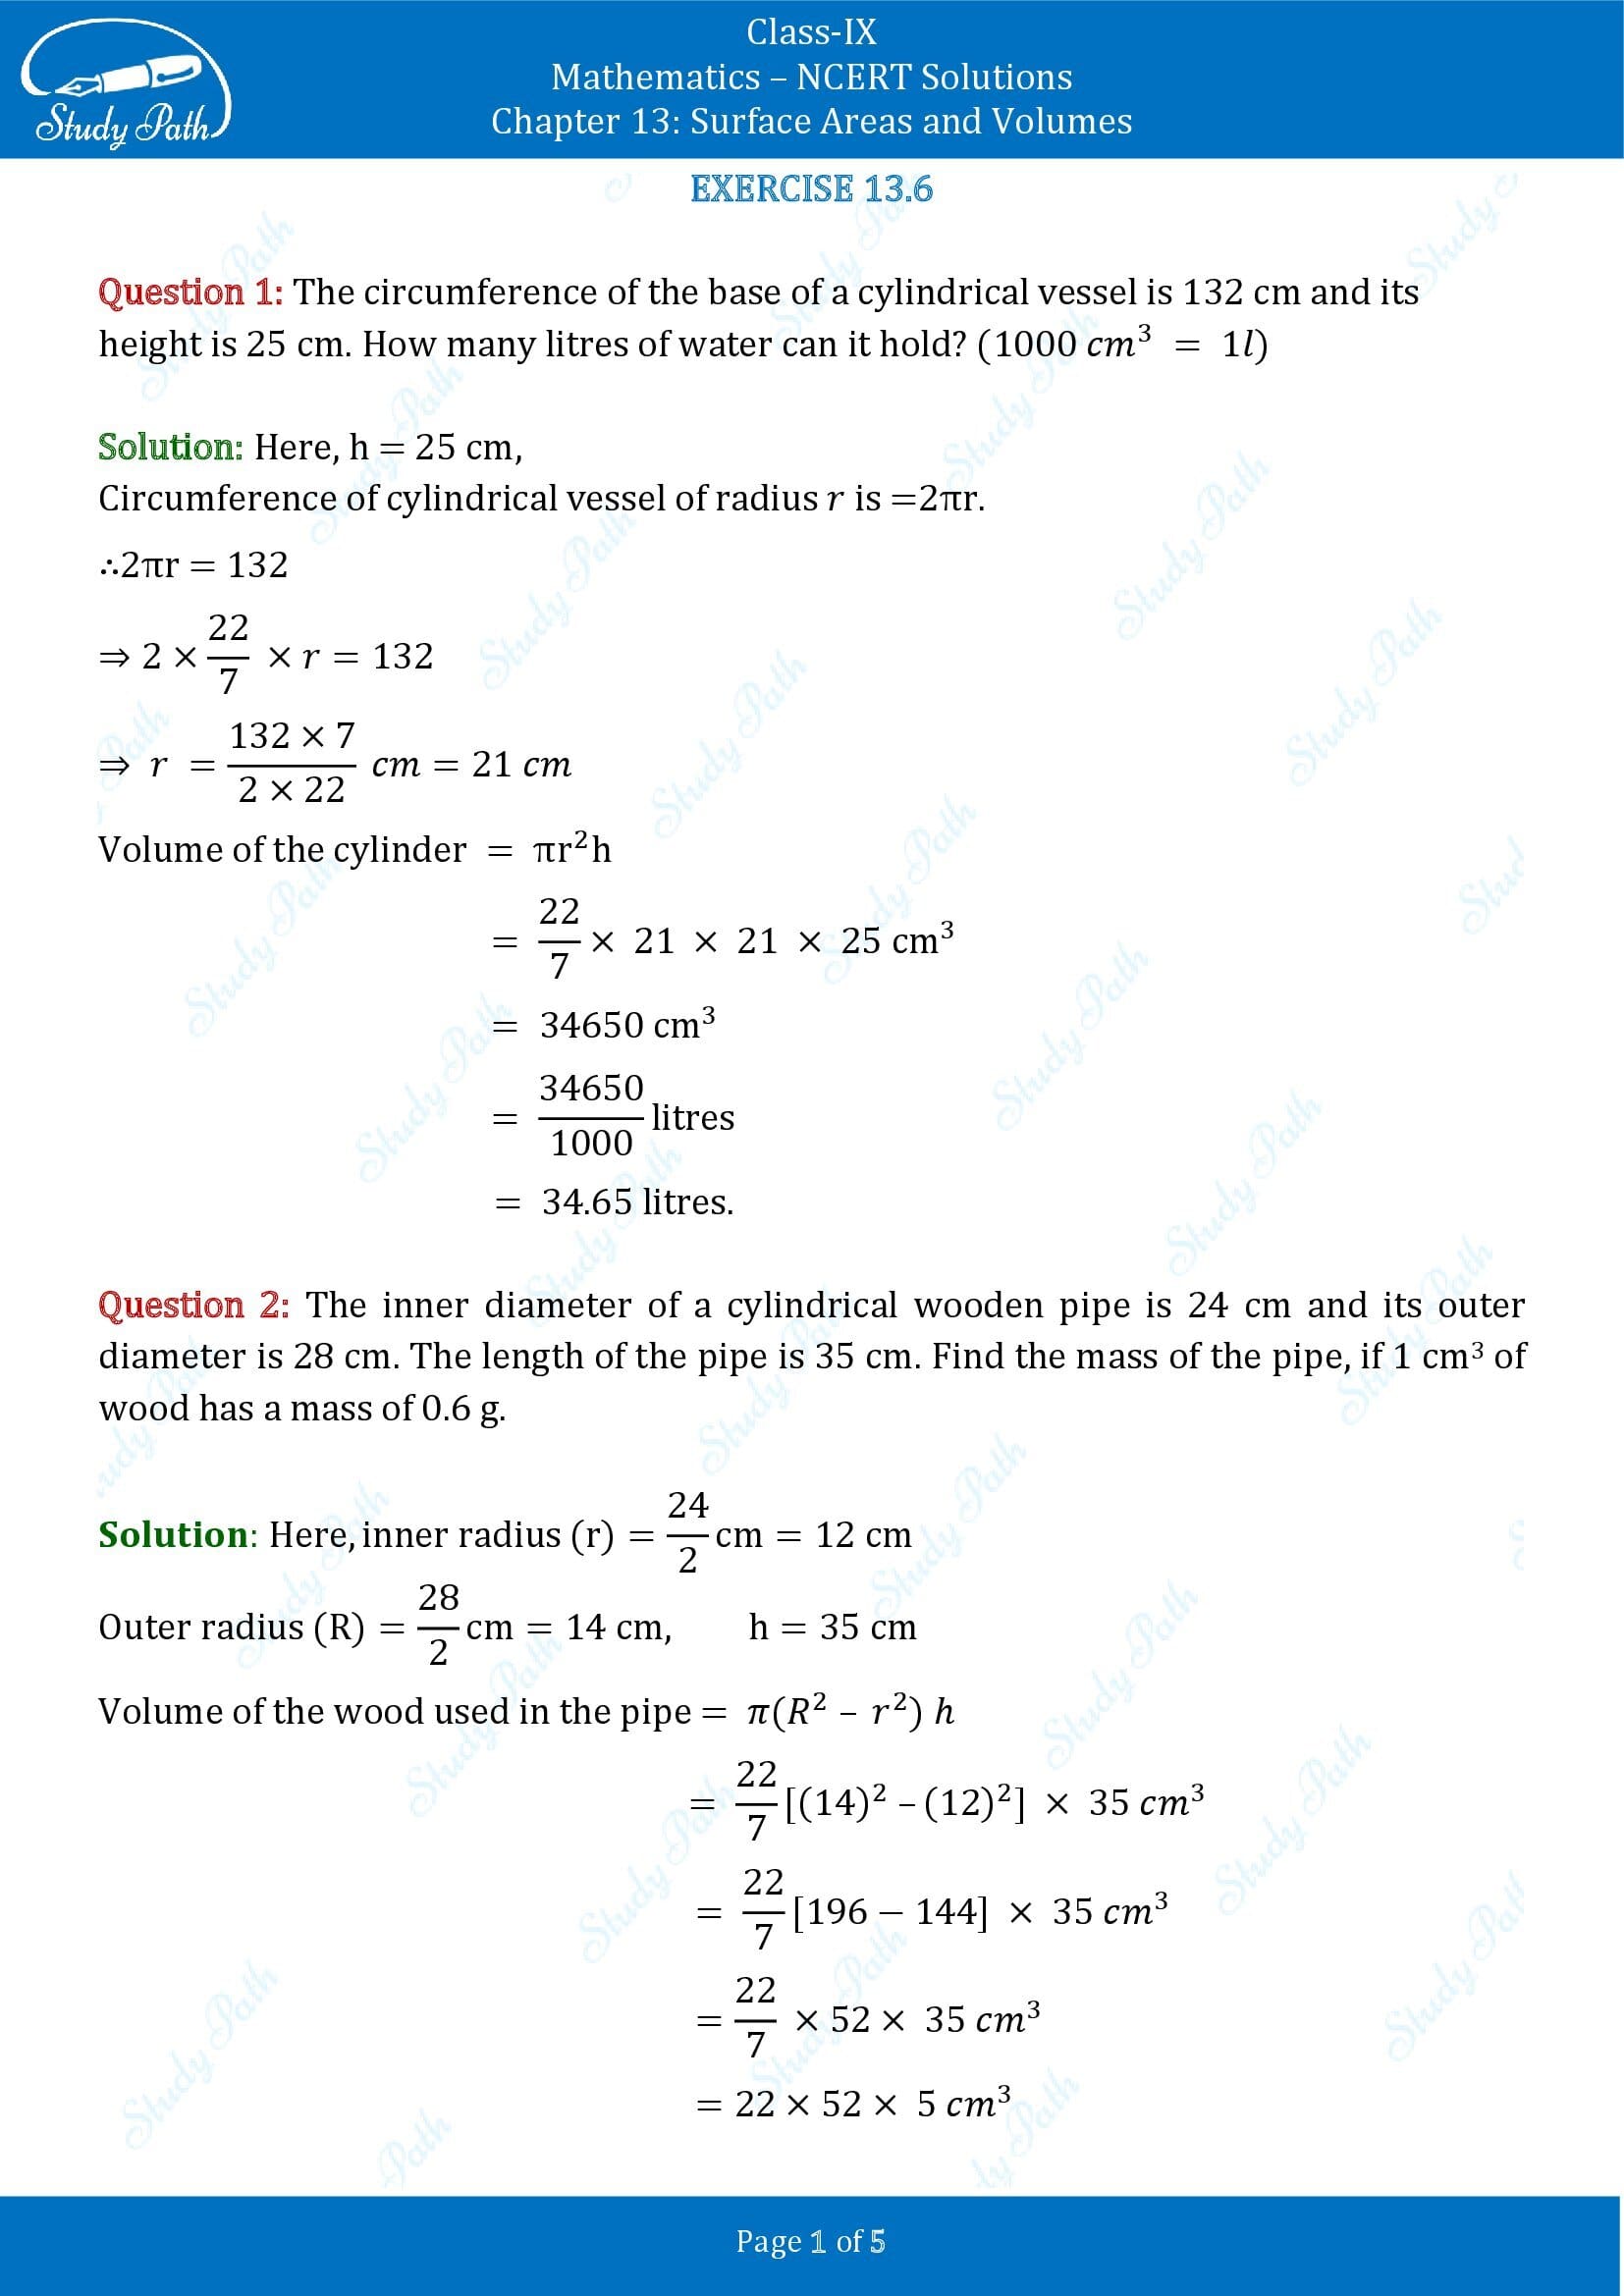 NCERT Solutions for Class 9 Maths Chapter 13 Surface Areas and Volumes Exercise 13.6 00001